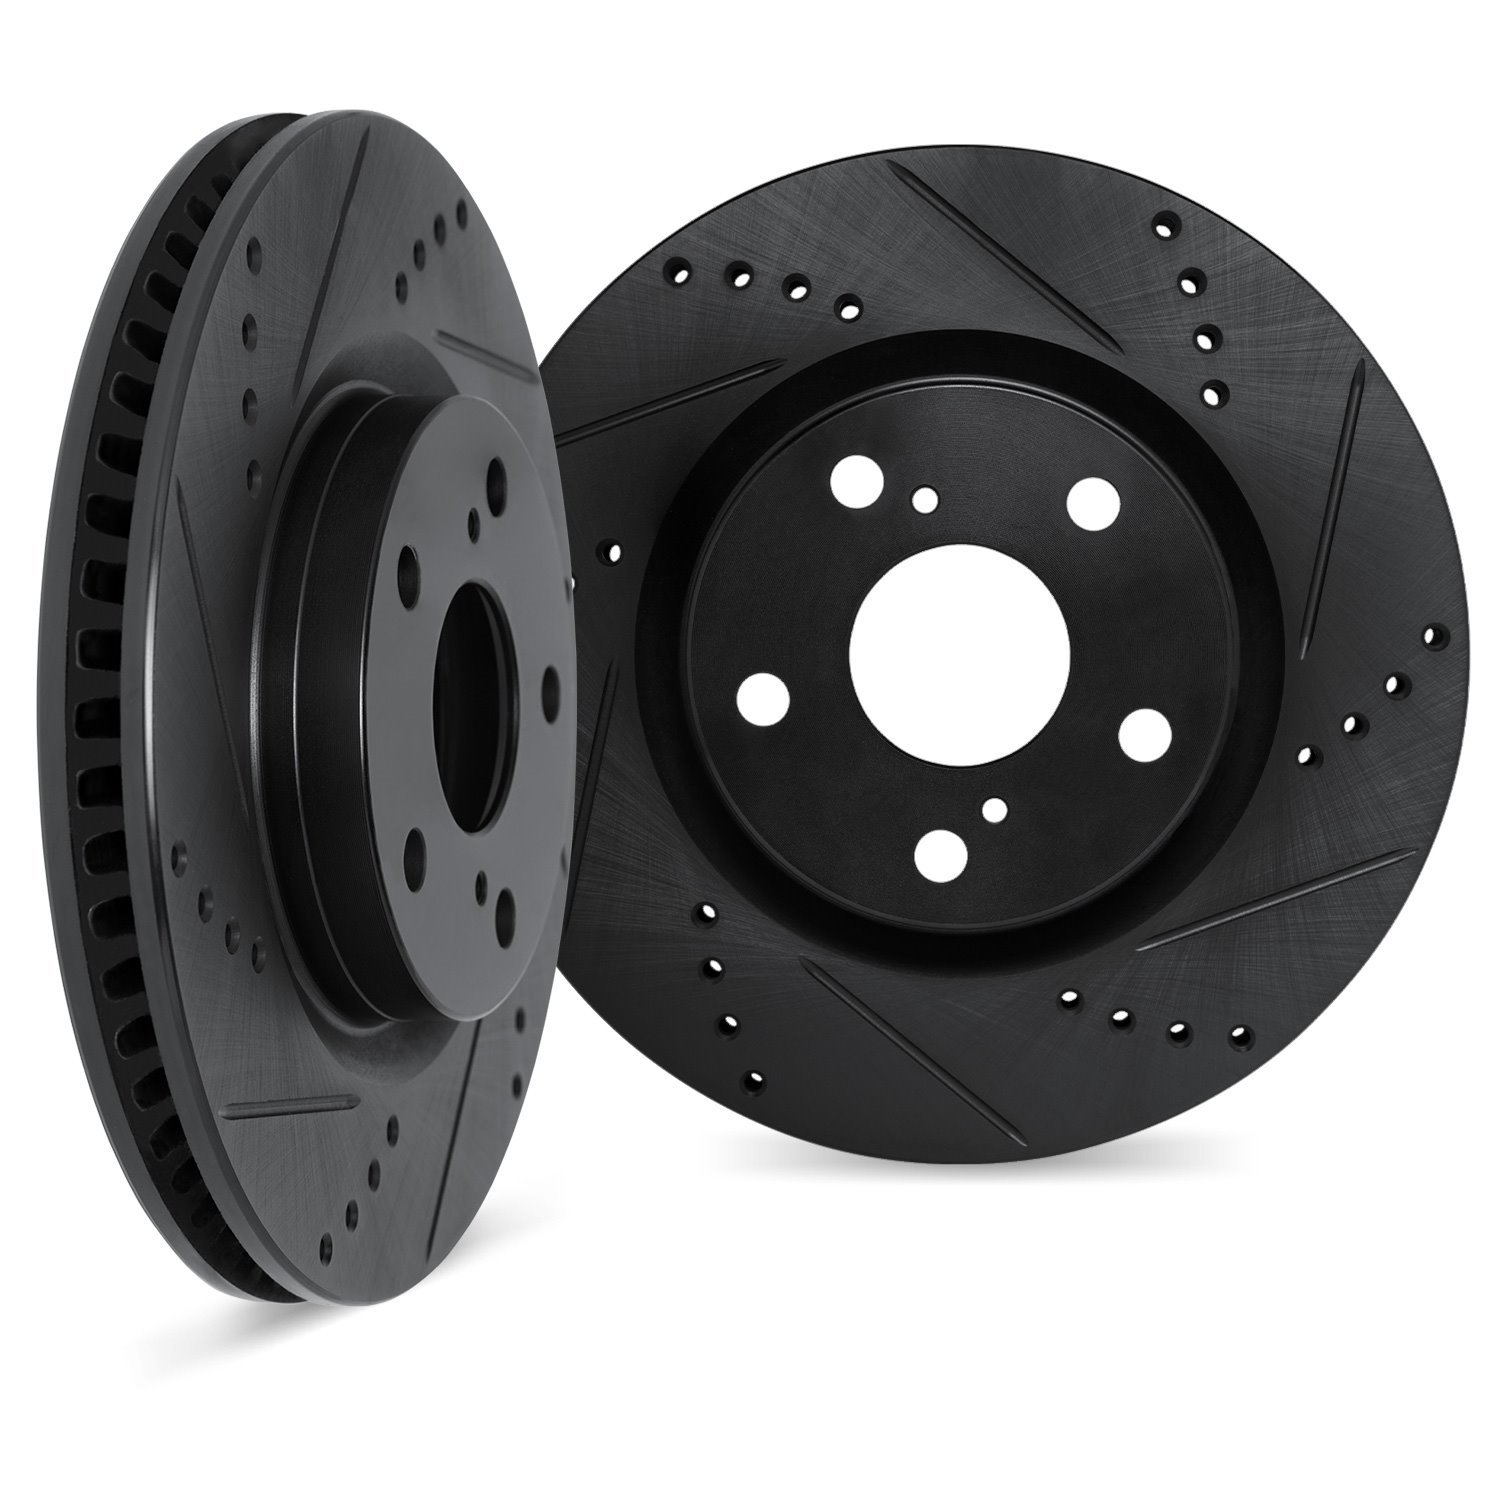 8002-55005 Drilled/Slotted Brake Rotors [Black], Fits Select Ford/Lincoln/Mercury/Mazda, Position: Rear